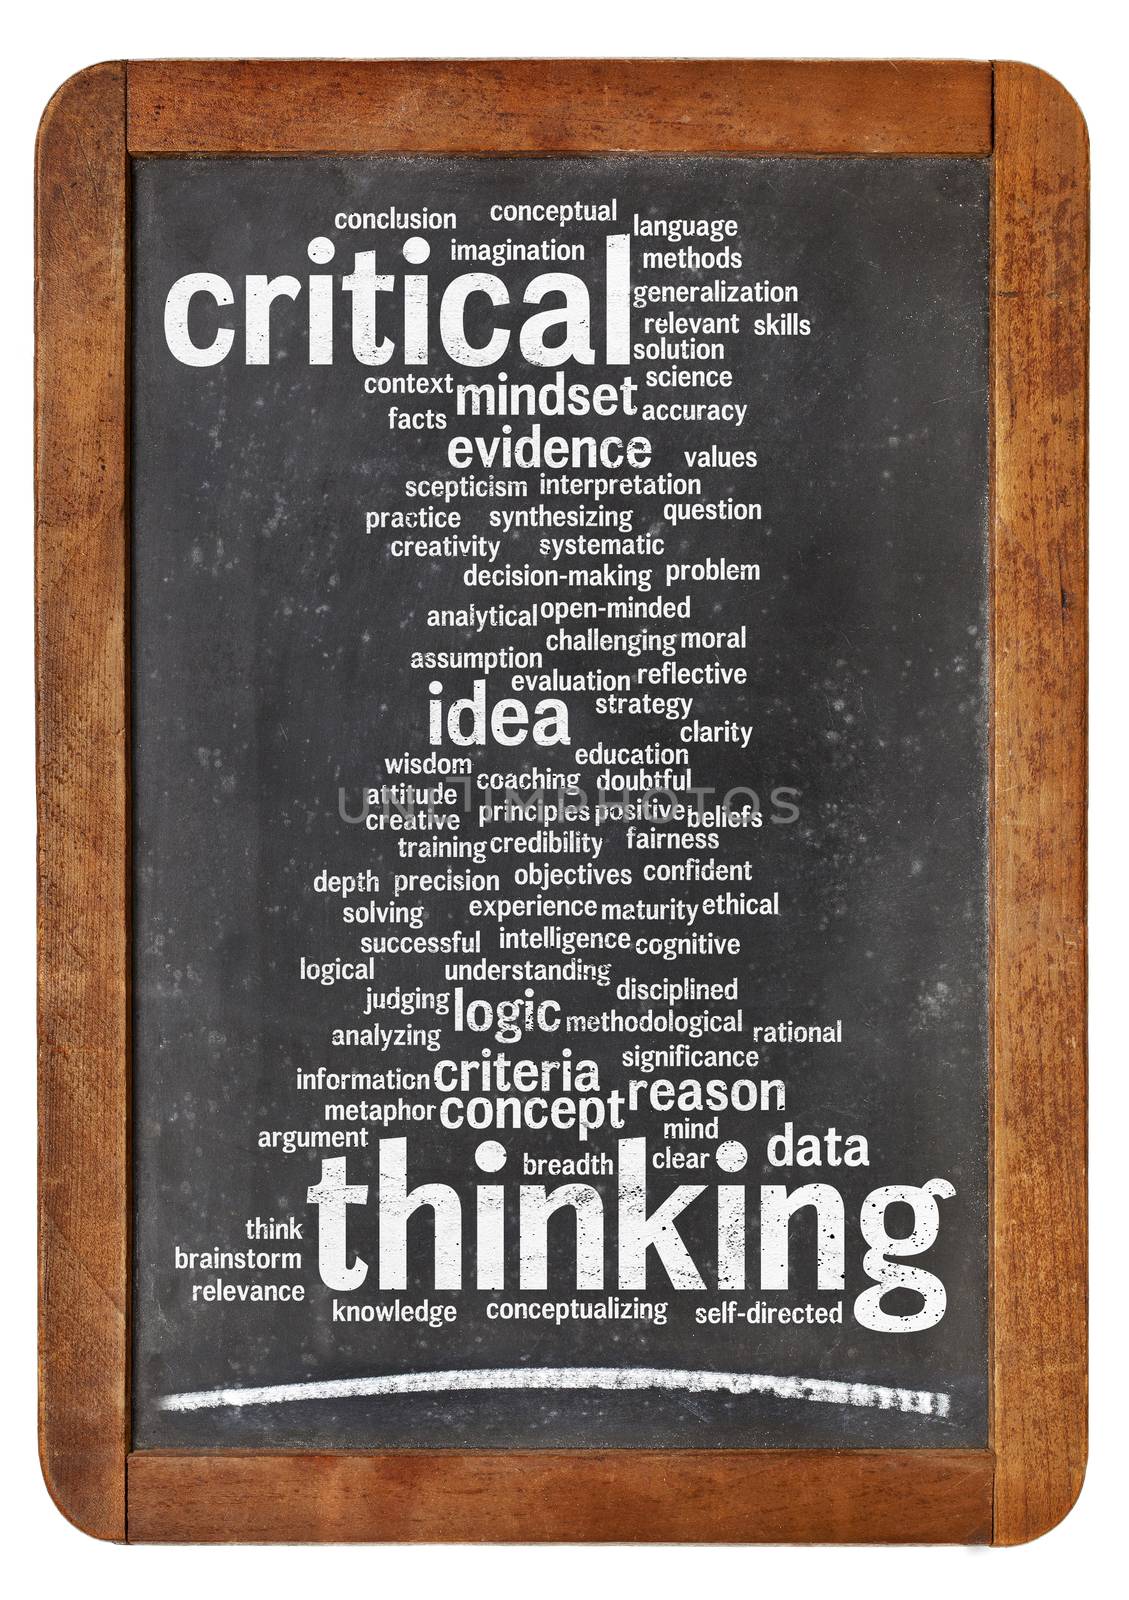 critical thinking word cloud on a vintage blackboard isolated on white